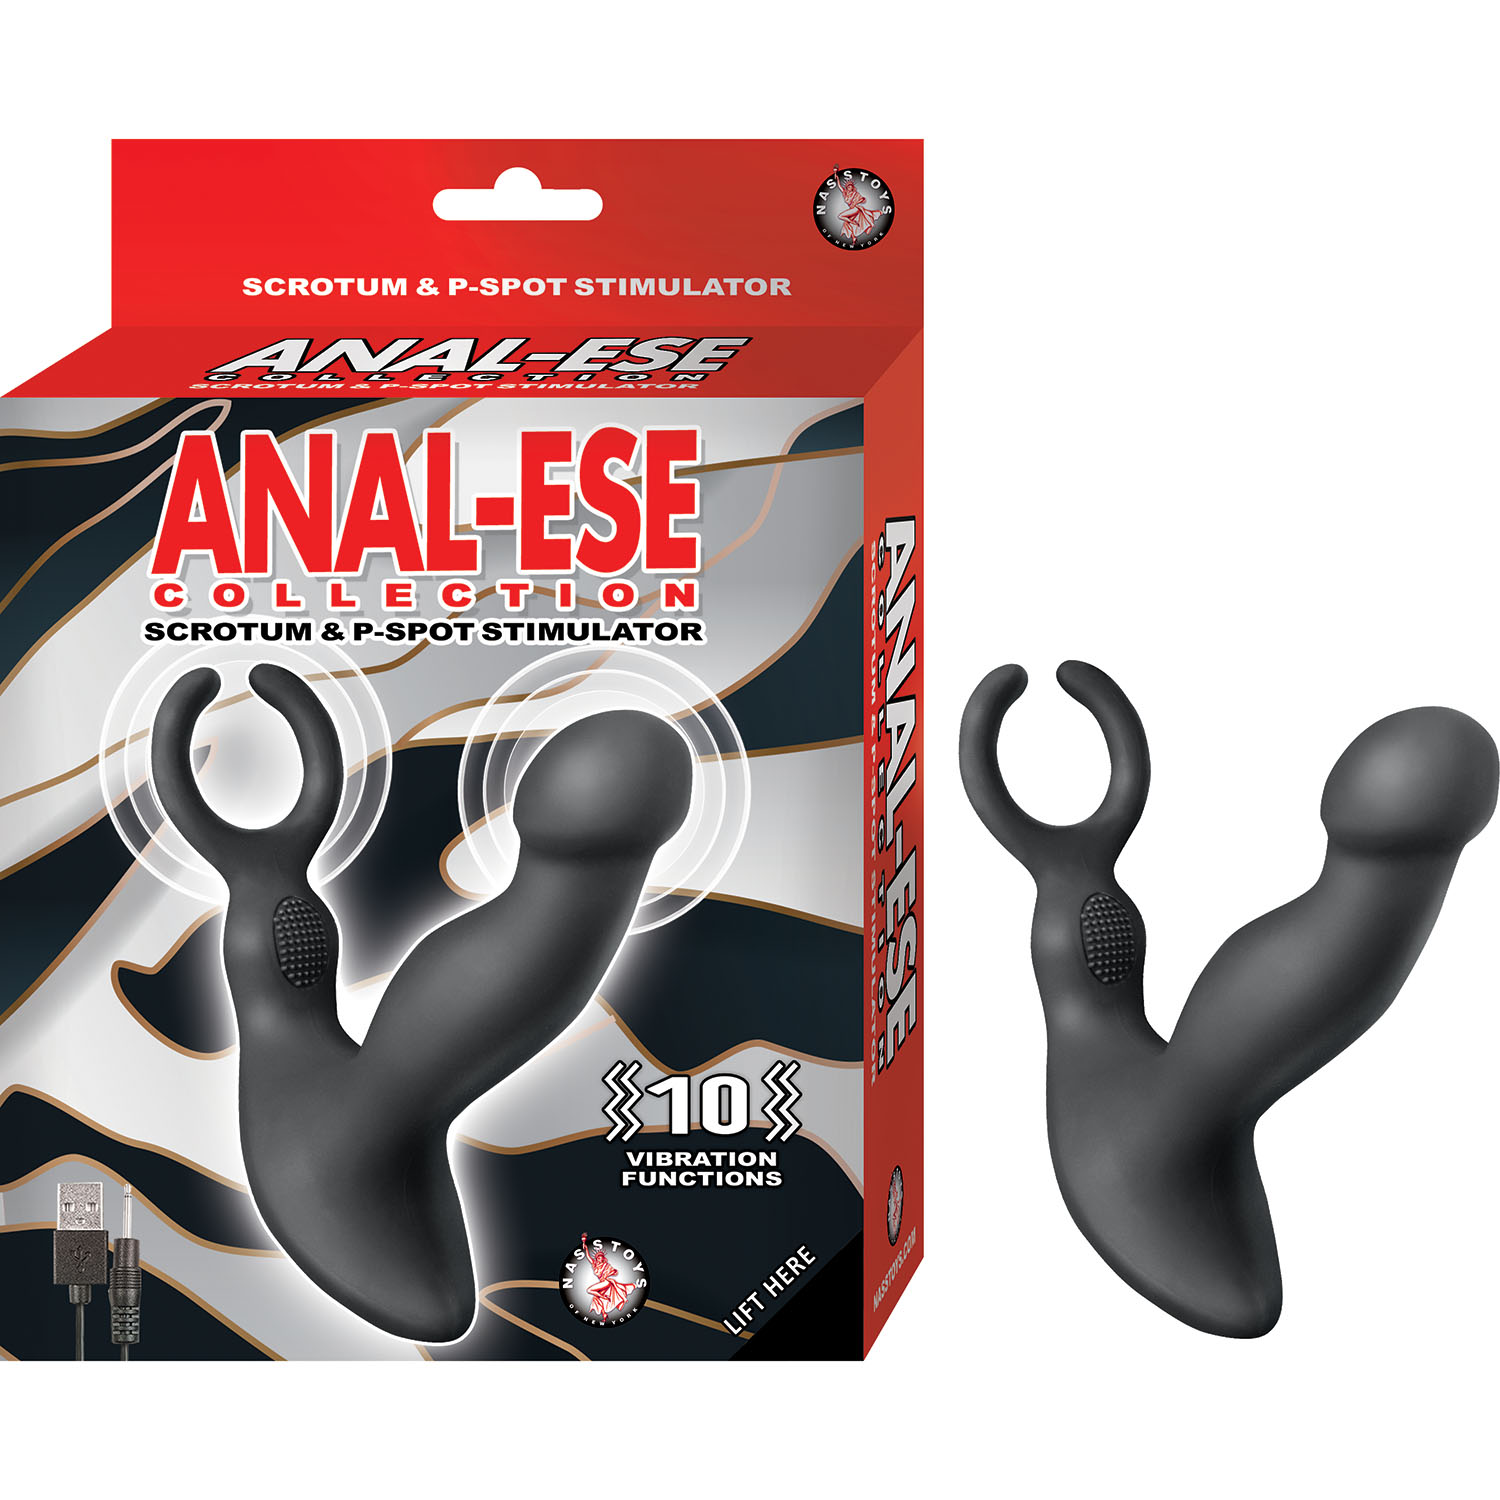 ANAL-ESE COLLECTION SCROTUM & P-SPOT STIMULATOR BLACK - Click Image to Close